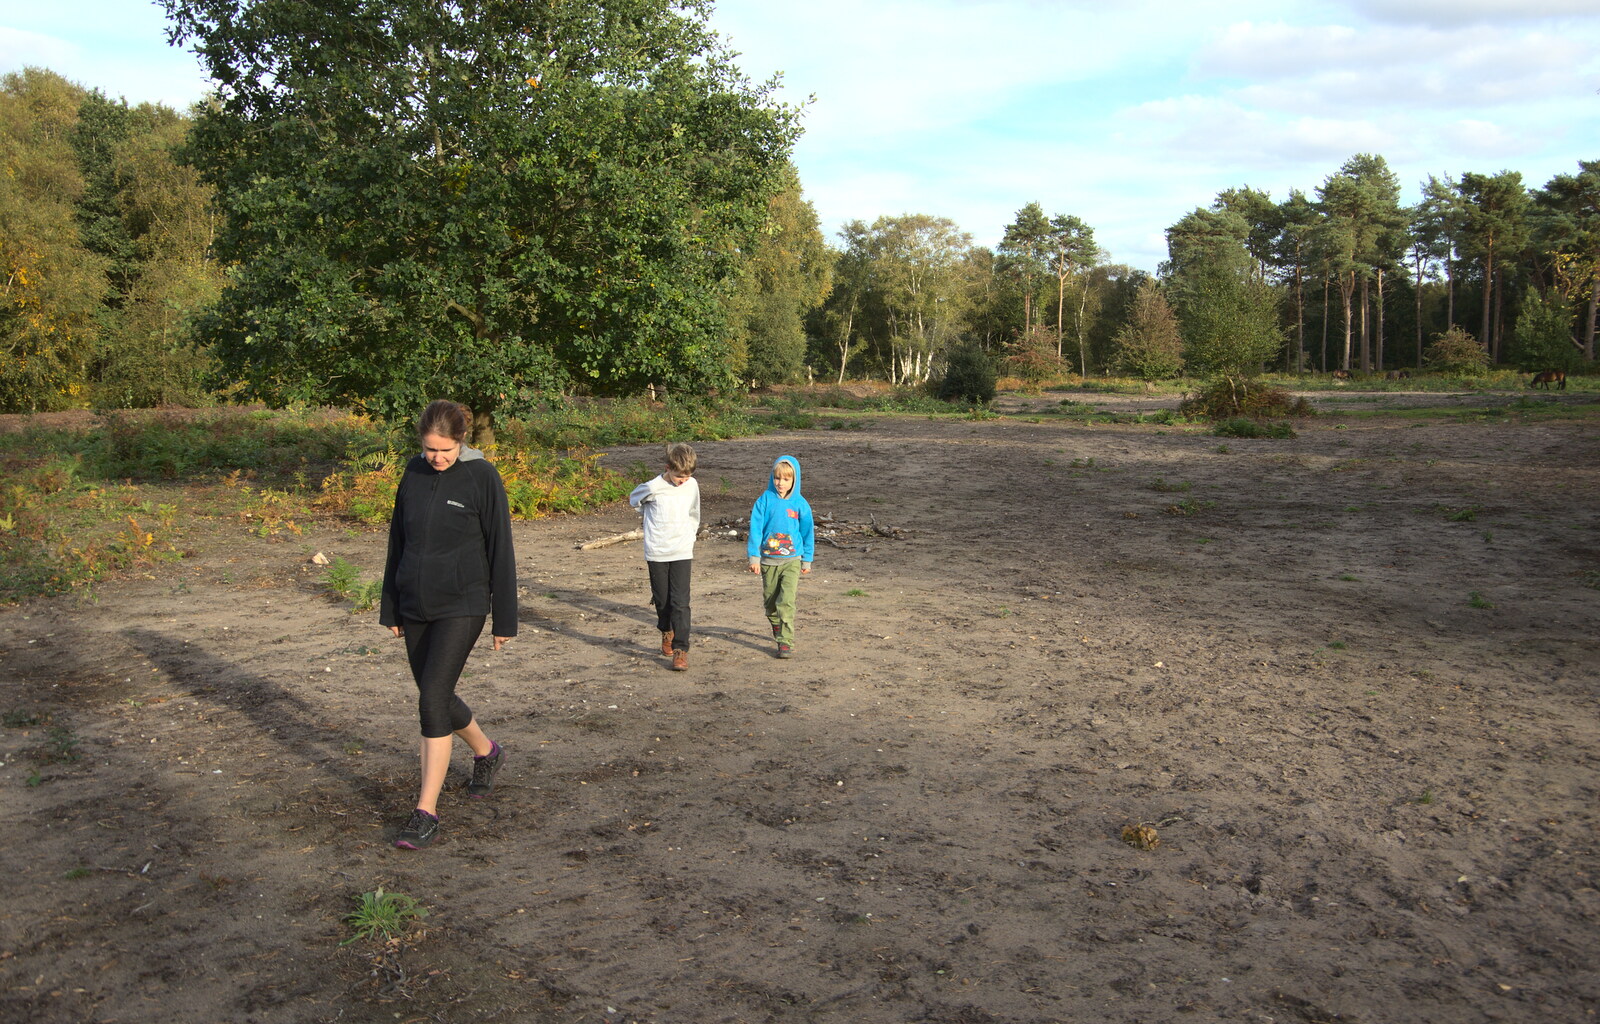 The gang roam around a patch of newly-cleared land from Evidence of Autumn: Geocaching on Knettishall Heath, Suffolk - 7th October 2018